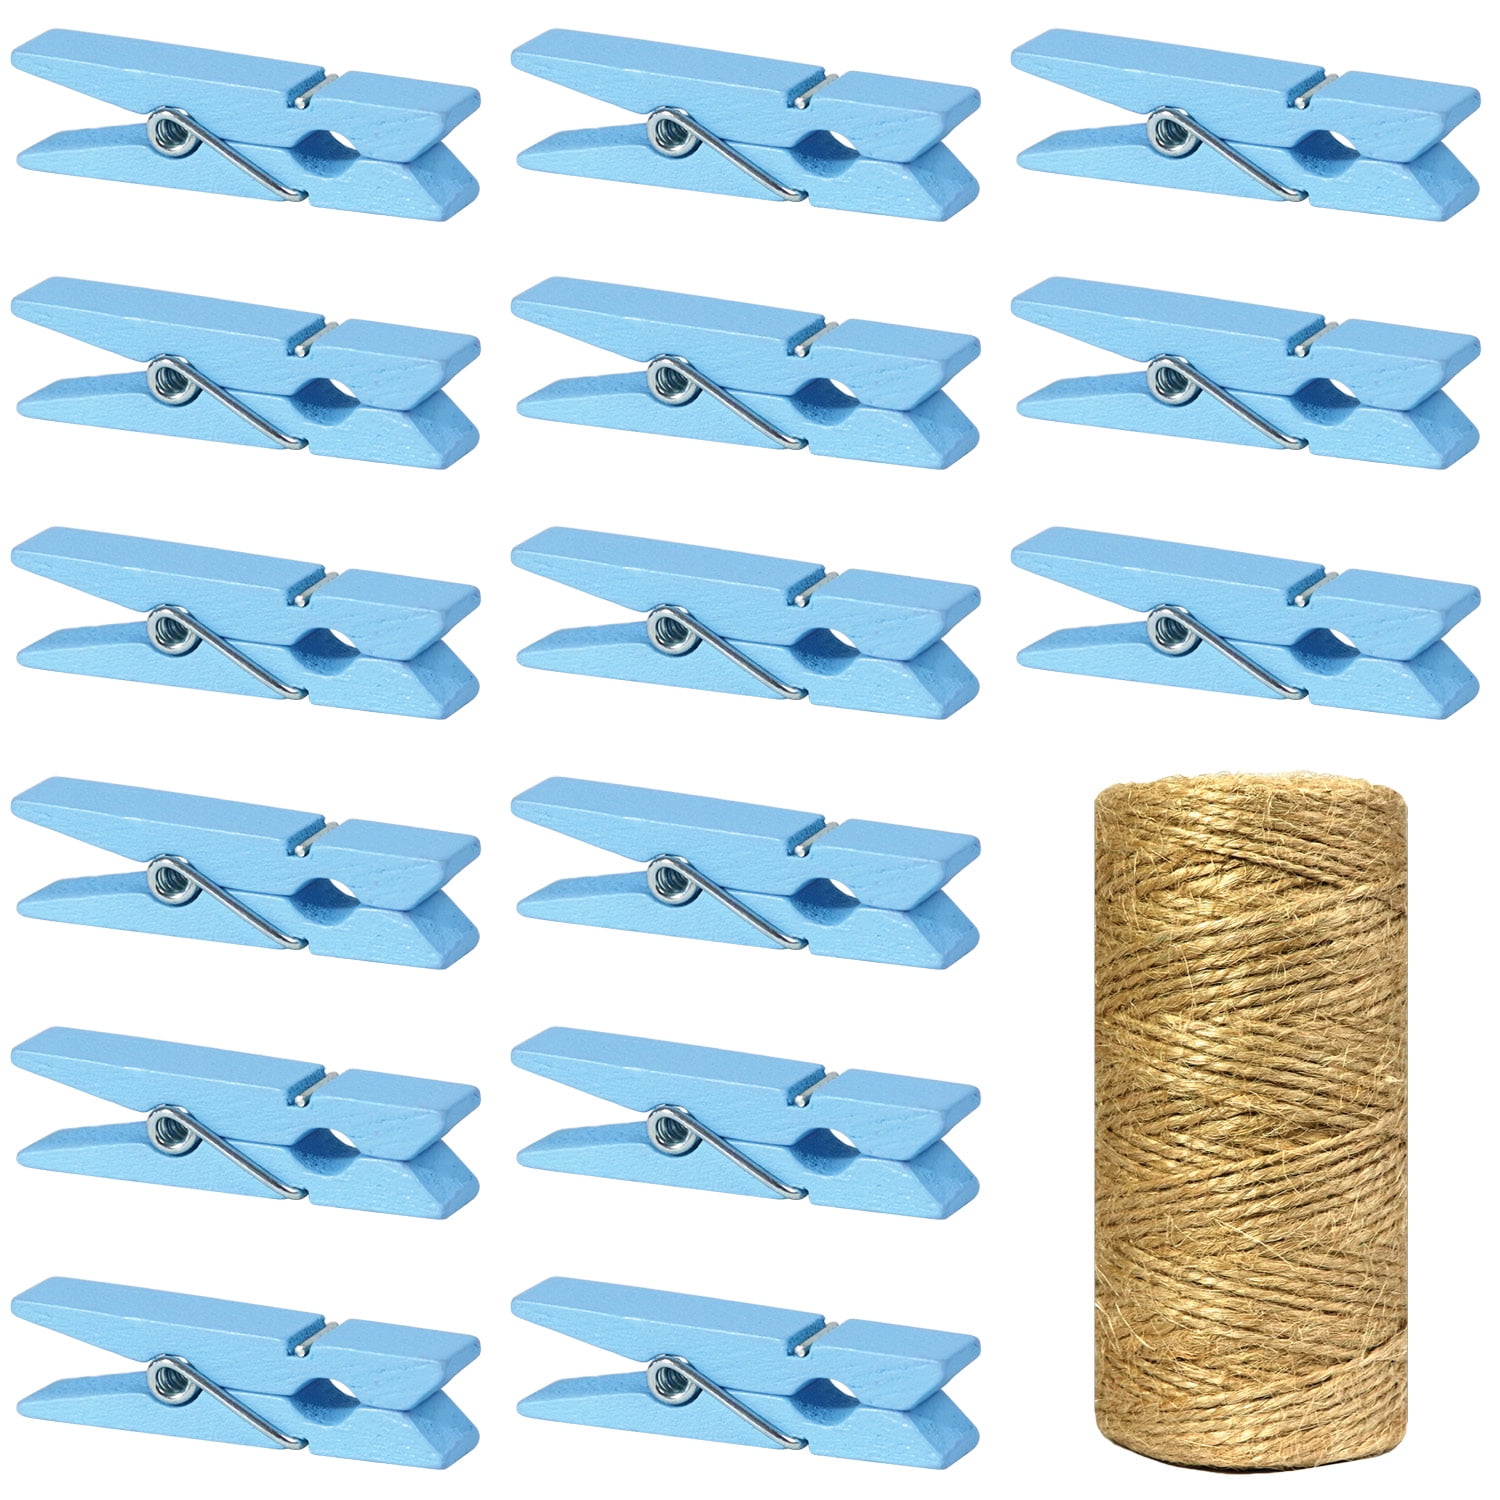 Clothes Pins Mini Clothespins Blue - 100 PCS Wooden Paper Photo Clips Tiny  Colored Small Clothespins for Pictures with Jute Twine, Ideal for Baby